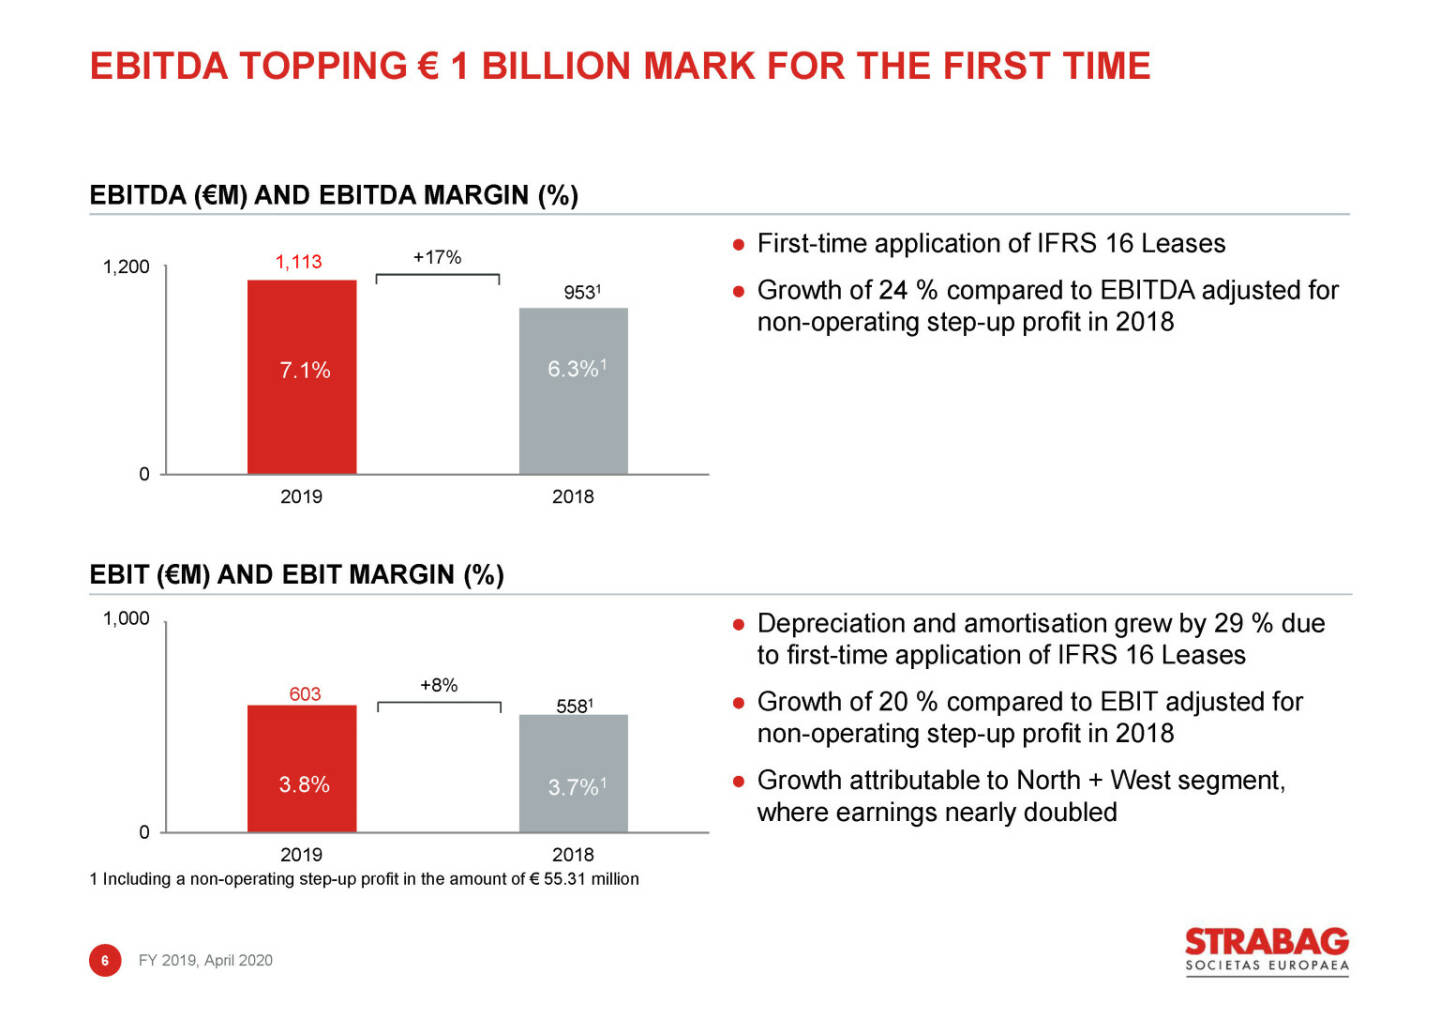 Strabag - ebitda topping € 1 billion mark for the first time